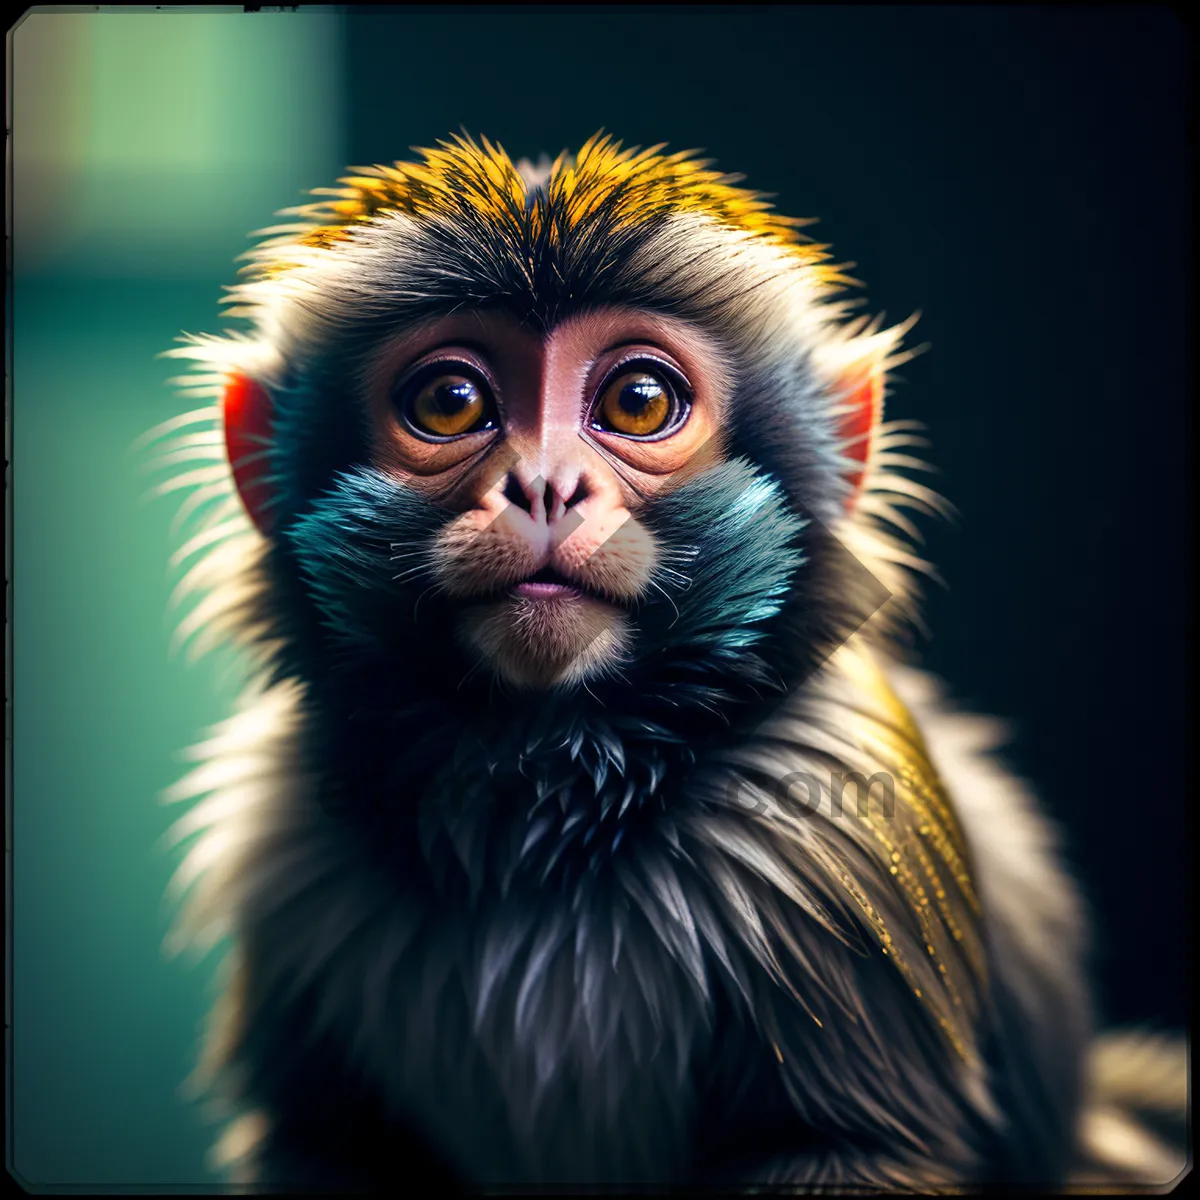 Picture of Playful Primate Posing with Piercing Eyes